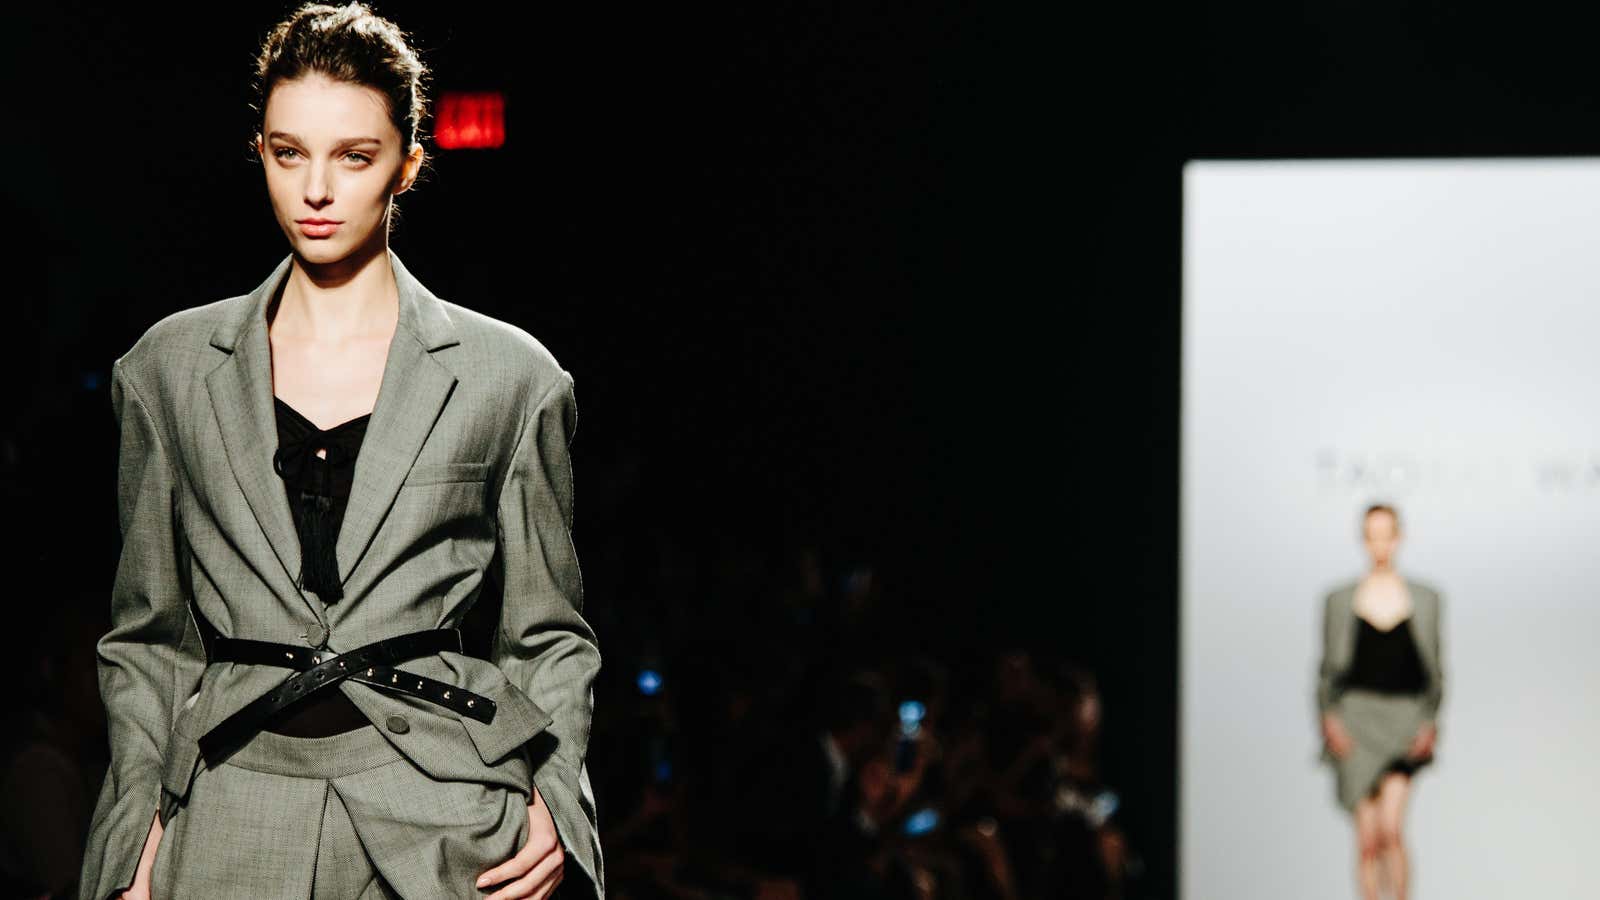 Shanghai-based Taoray Wang will be getting some more company from China at New York Fashion Week.